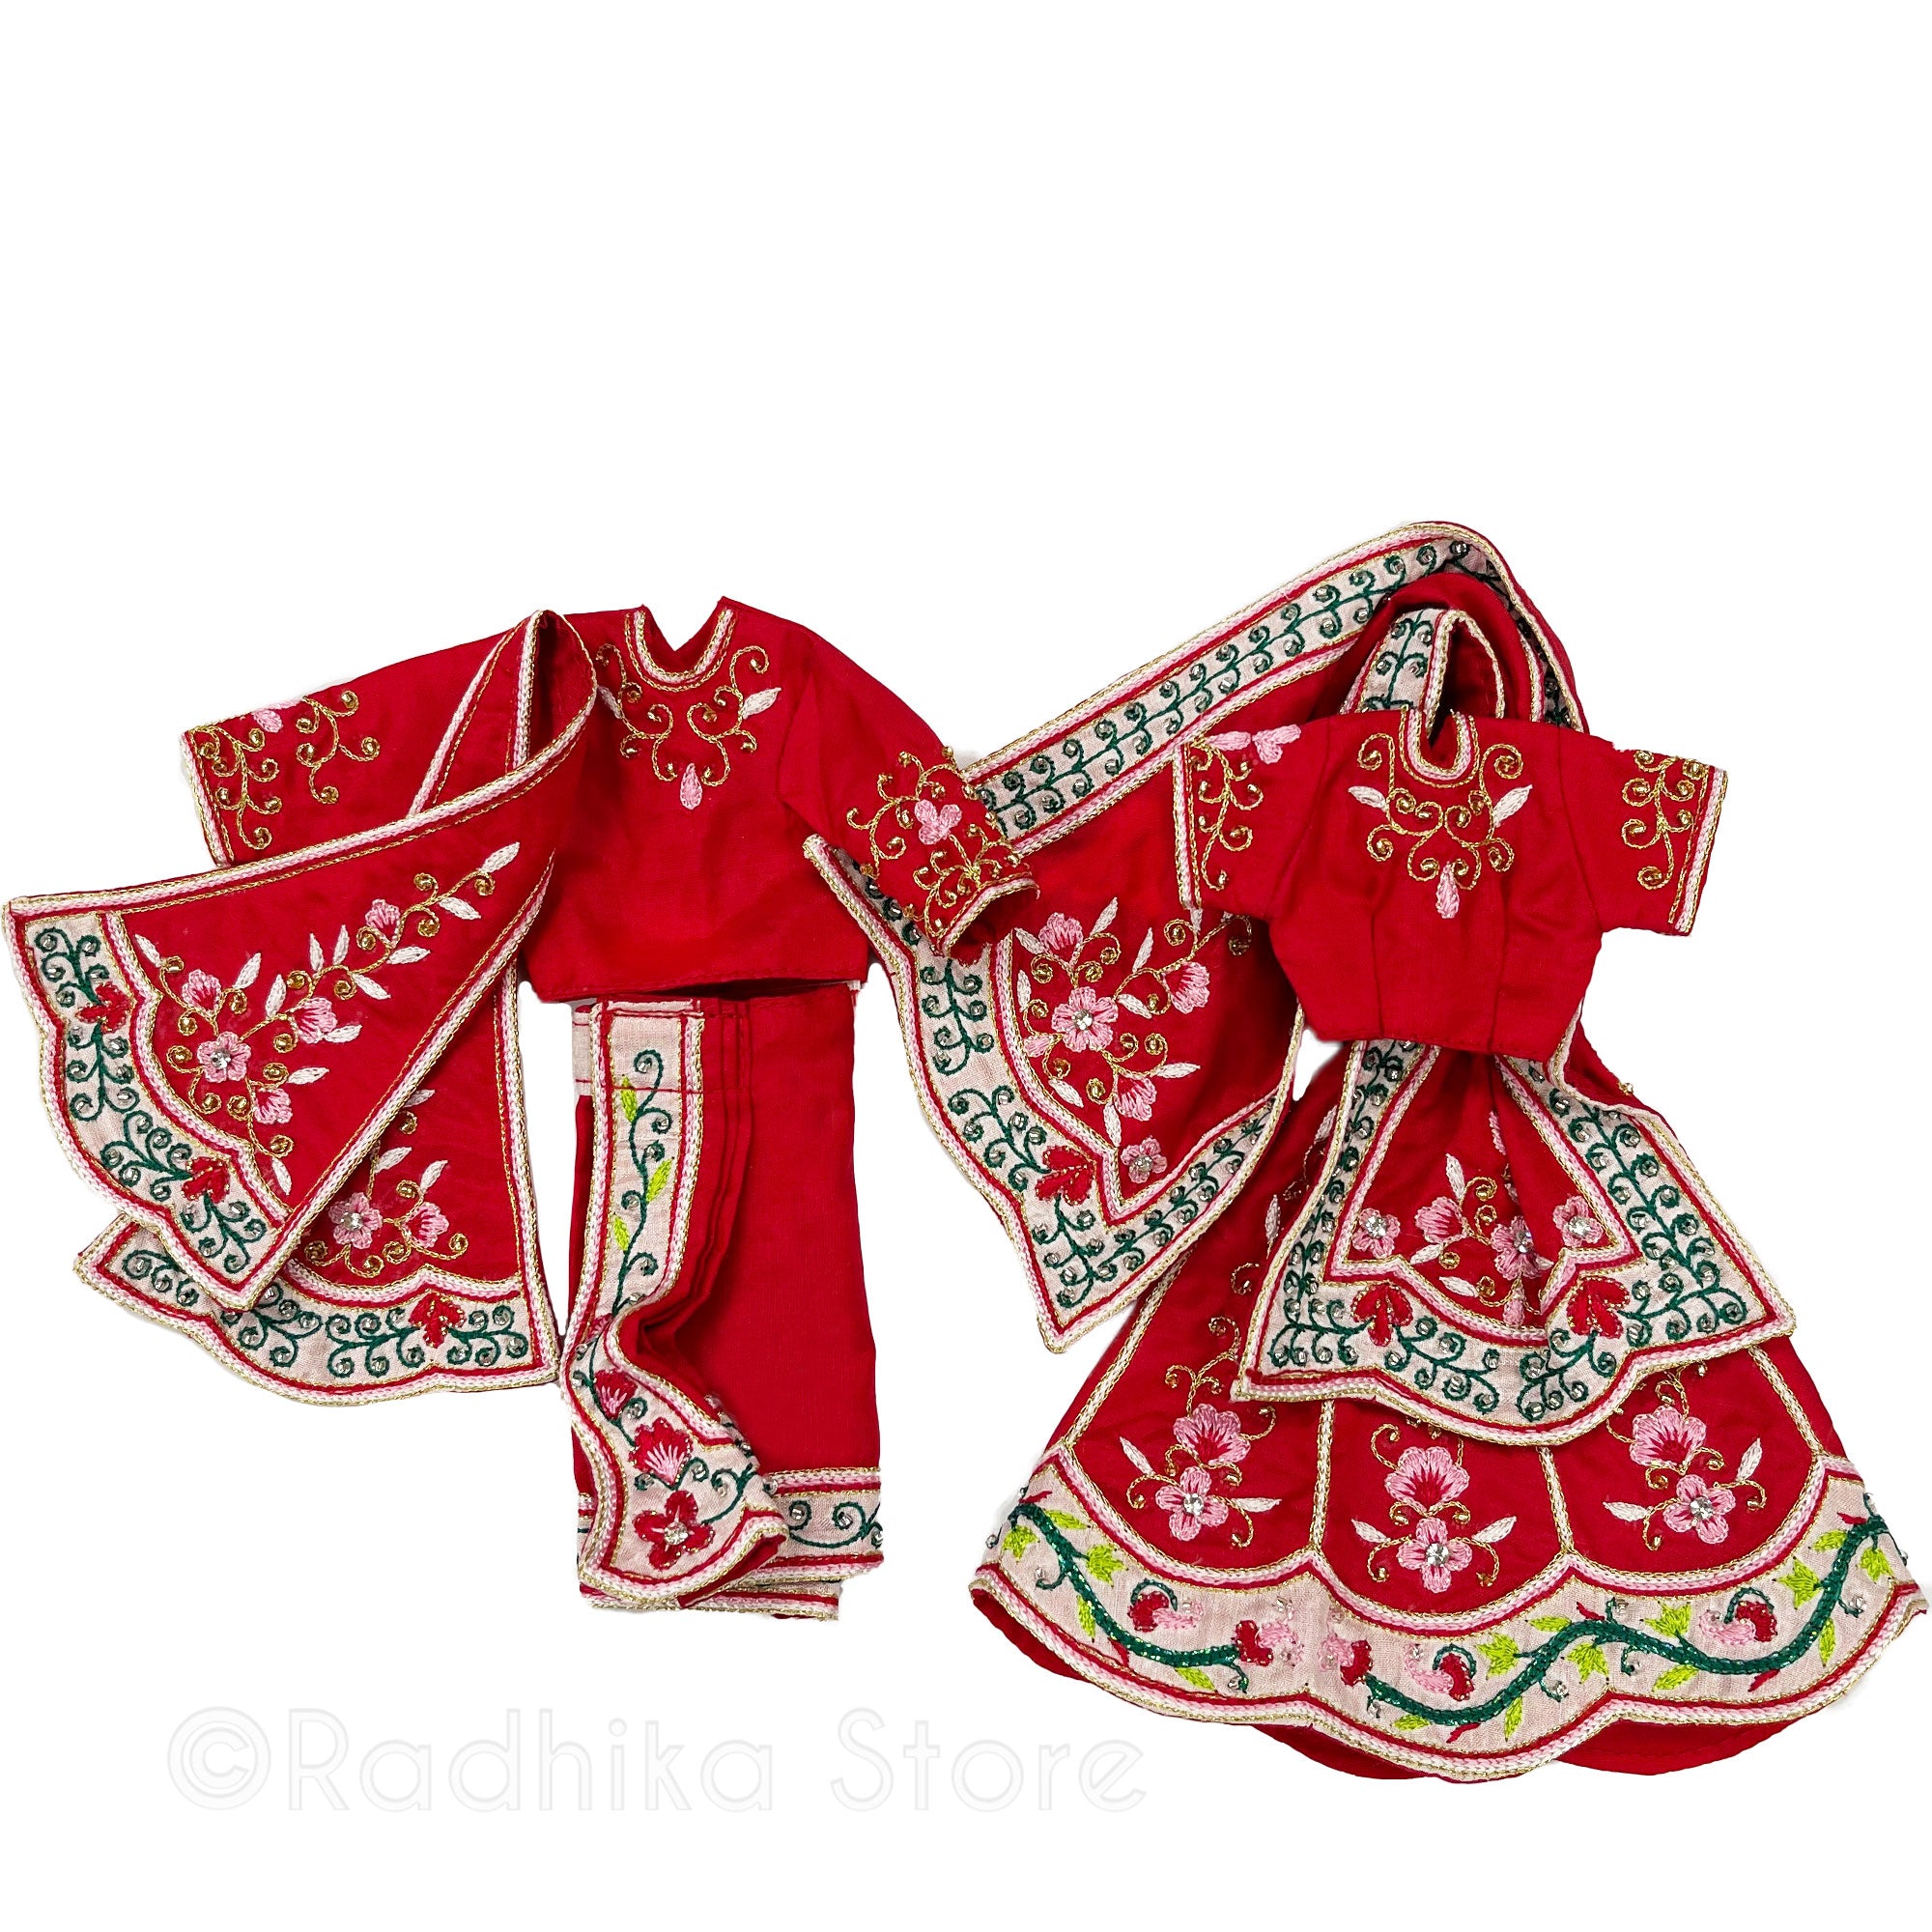 Premananda -  All Silk - Red-Pink-Greens And Gold - Radha Krishna Deity Outfit